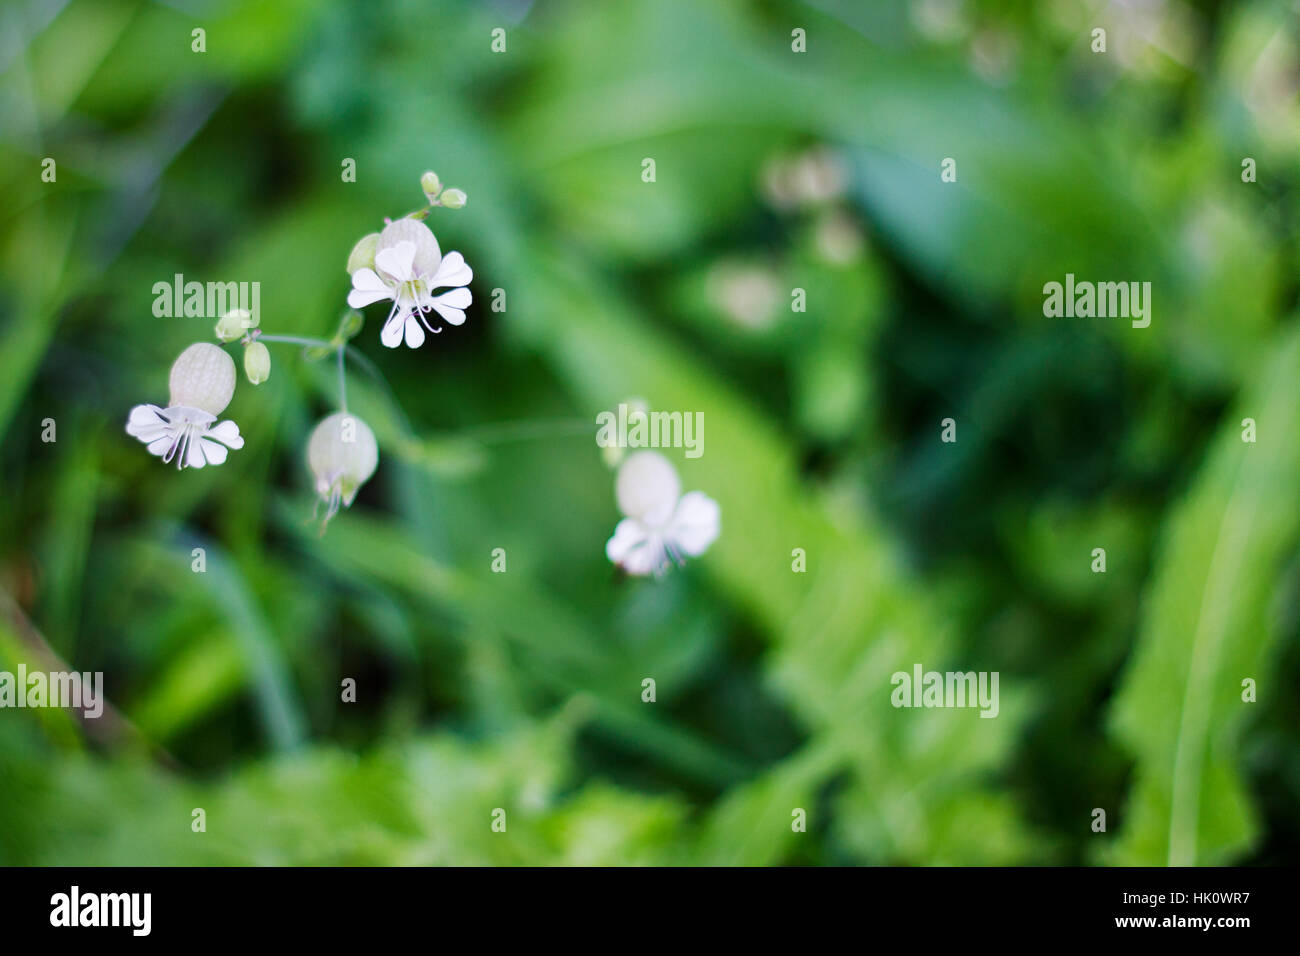 small white flower (silene vulgaris) with green grass in background Stock Photo